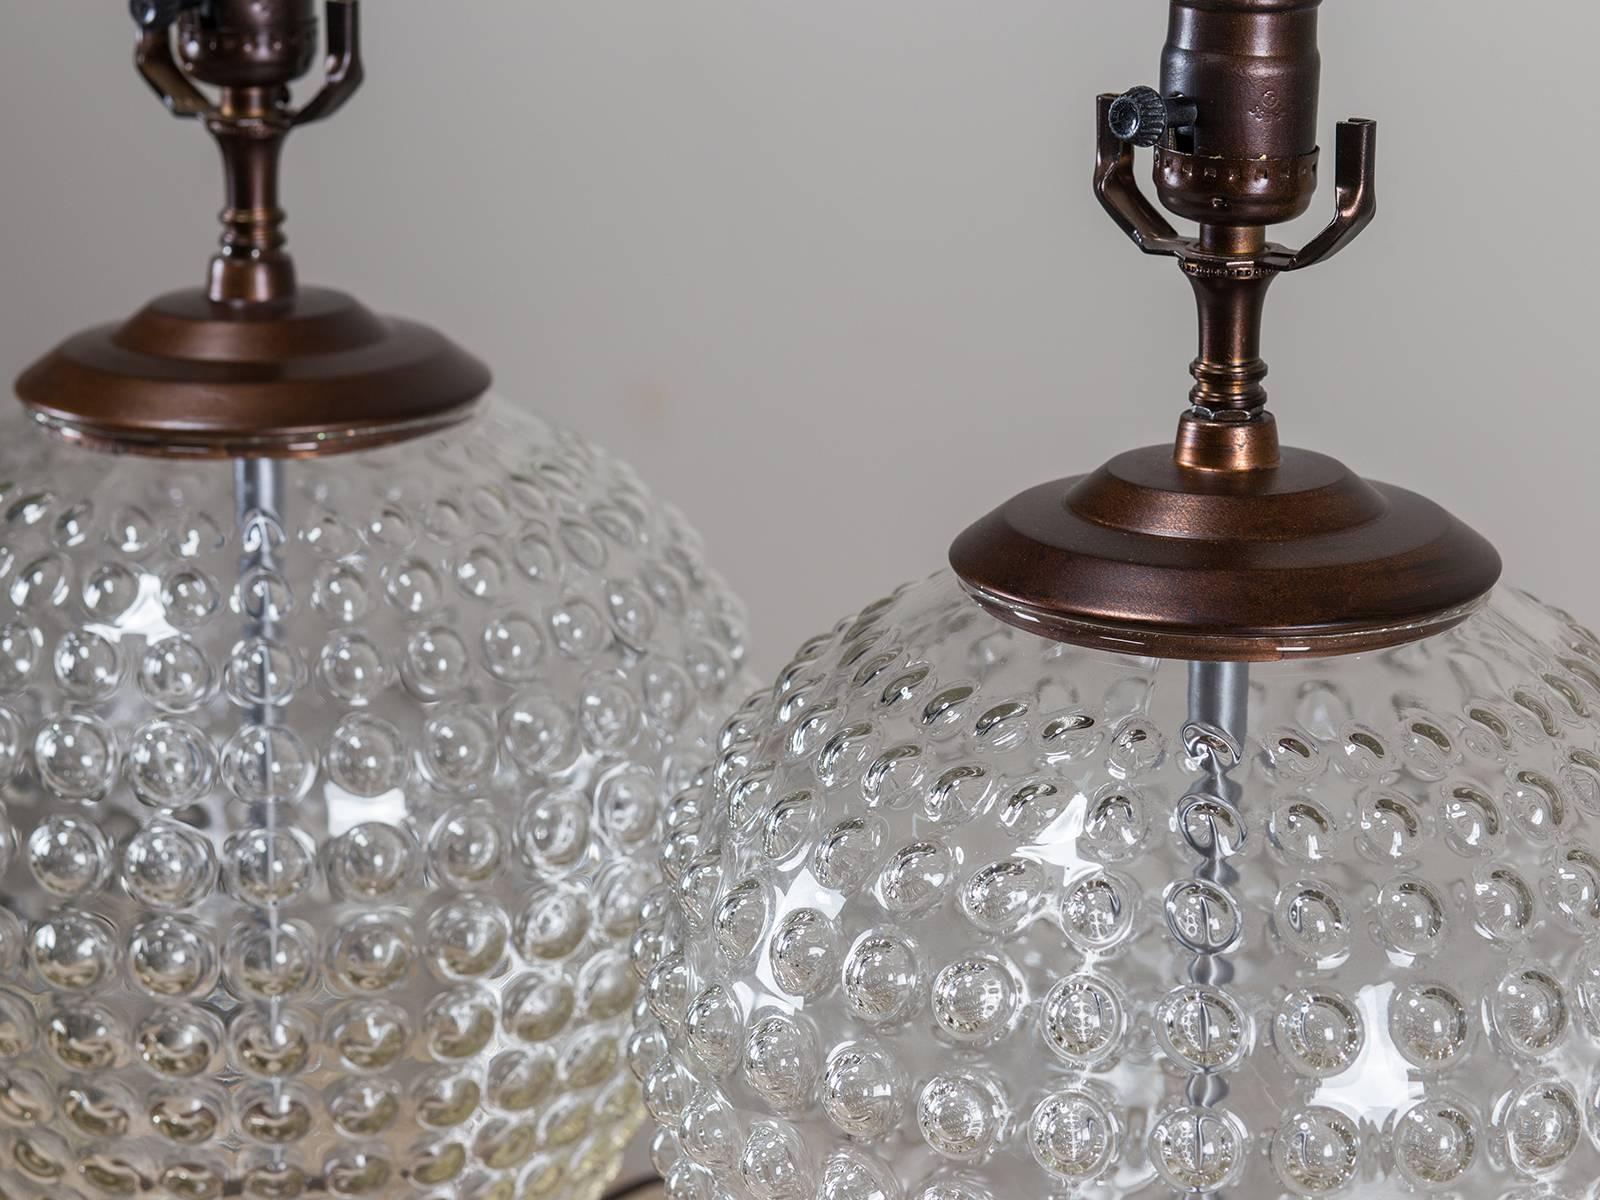 A pair of hand blown vintage French glass vessels with a distinctive hobnail pattern mounted with a copper/bronze color metal base and cover as lamps and rewired for American electricity. The beautiful manner in which light is reflected by the